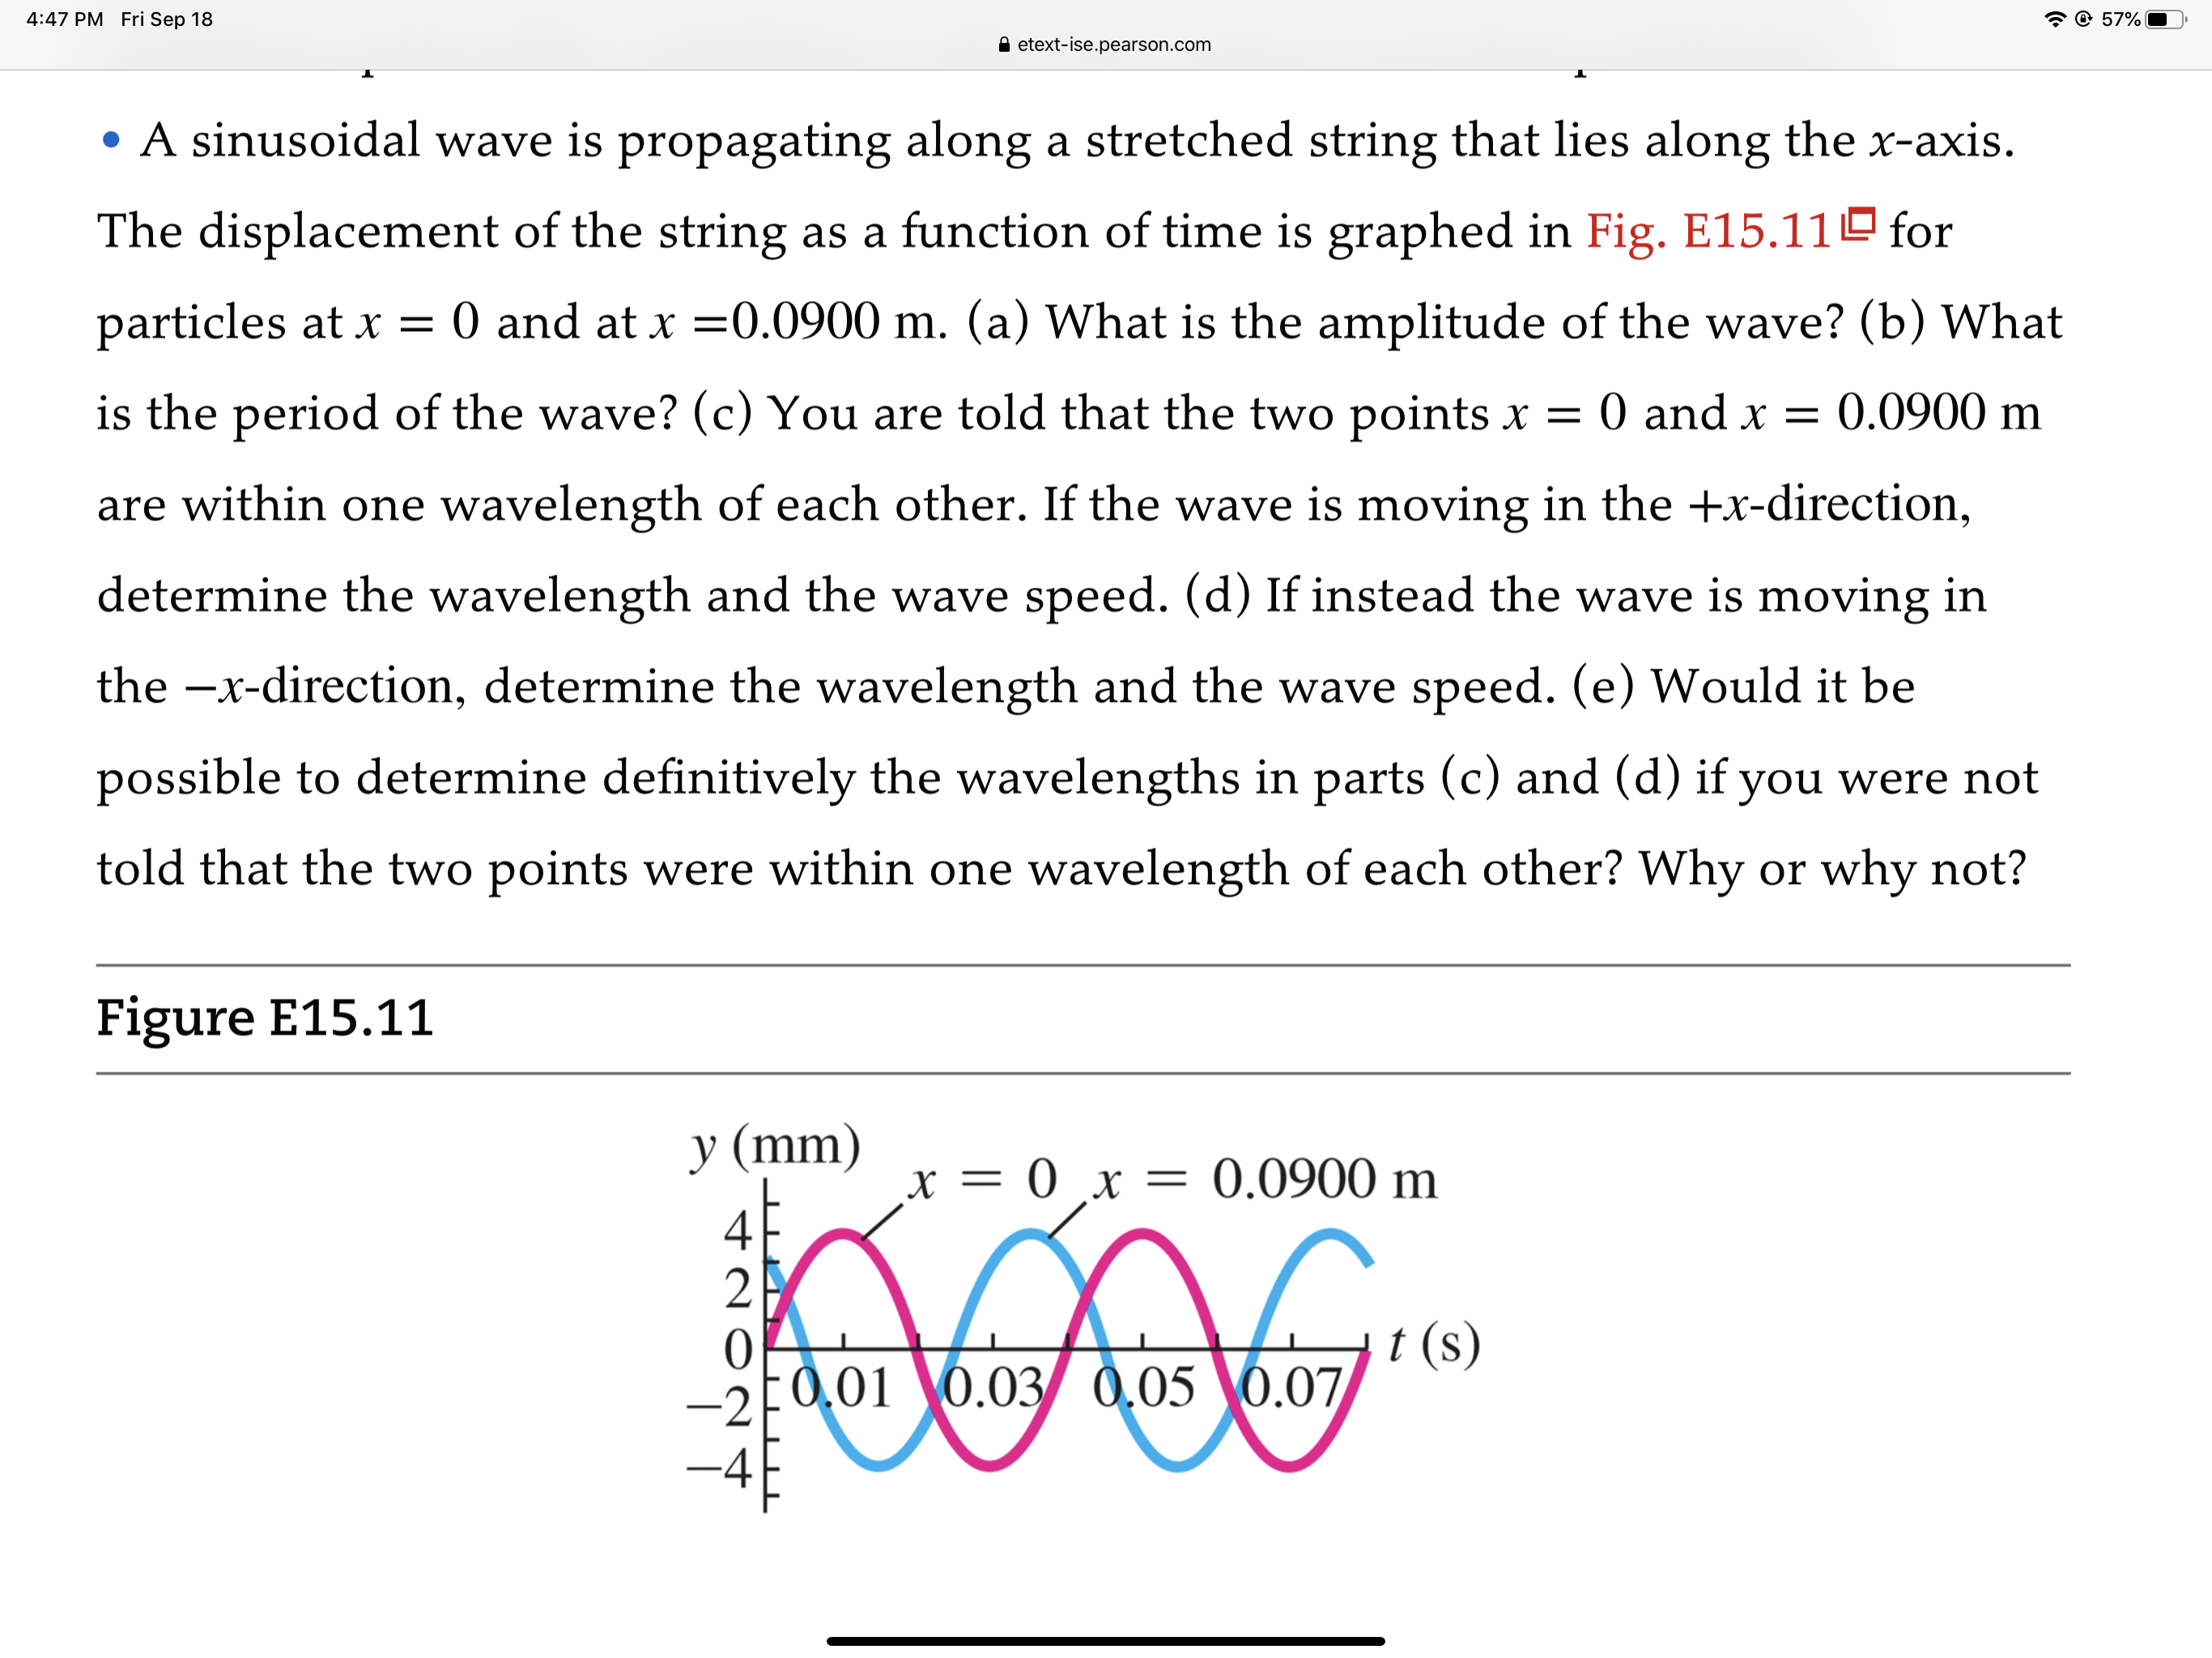 • A sinusoidal wave is propagating along a stretched string that lies along the x-axis.
The displacement of the string as a function of time is graphed in Fig. E15.11º for
particles at x =
O and at x =0.0900 m. (a) What is the amplitude of the wave? (b) What
is the period of the wave? (c) You are told that the two points x =
O and x = 0.0900 m
are within one wavelength of each other. If the wave is moving in the +x-direction,
determine the wavelength and the wave speed. (d) If instead the wave is moving in
the –x-direction, determine the wavelength and the wave speed. (e) Would it be
possible to determine definitively the wavelengths in parts (c) and (d) if you were not
told that the two points were within one wavelength of each other? Why or why not?
